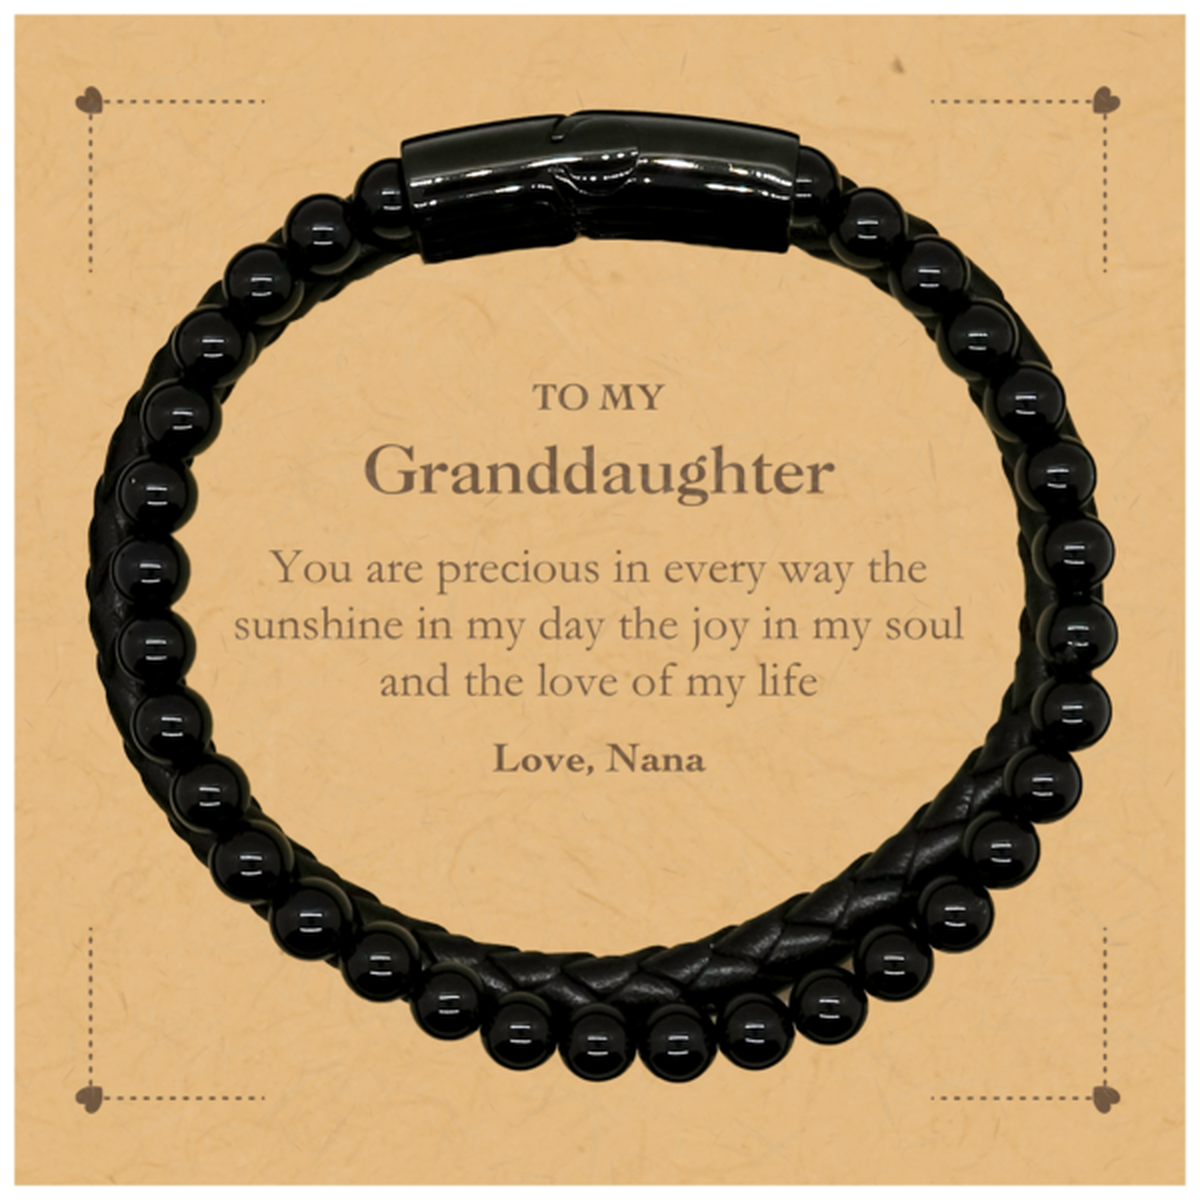 Graduation Gifts for Granddaughter Stone Leather Bracelets Present from Nana, Christmas Granddaughter Birthday Gifts Granddaughter You are precious in every way the sunshine in my day. Love, Nana